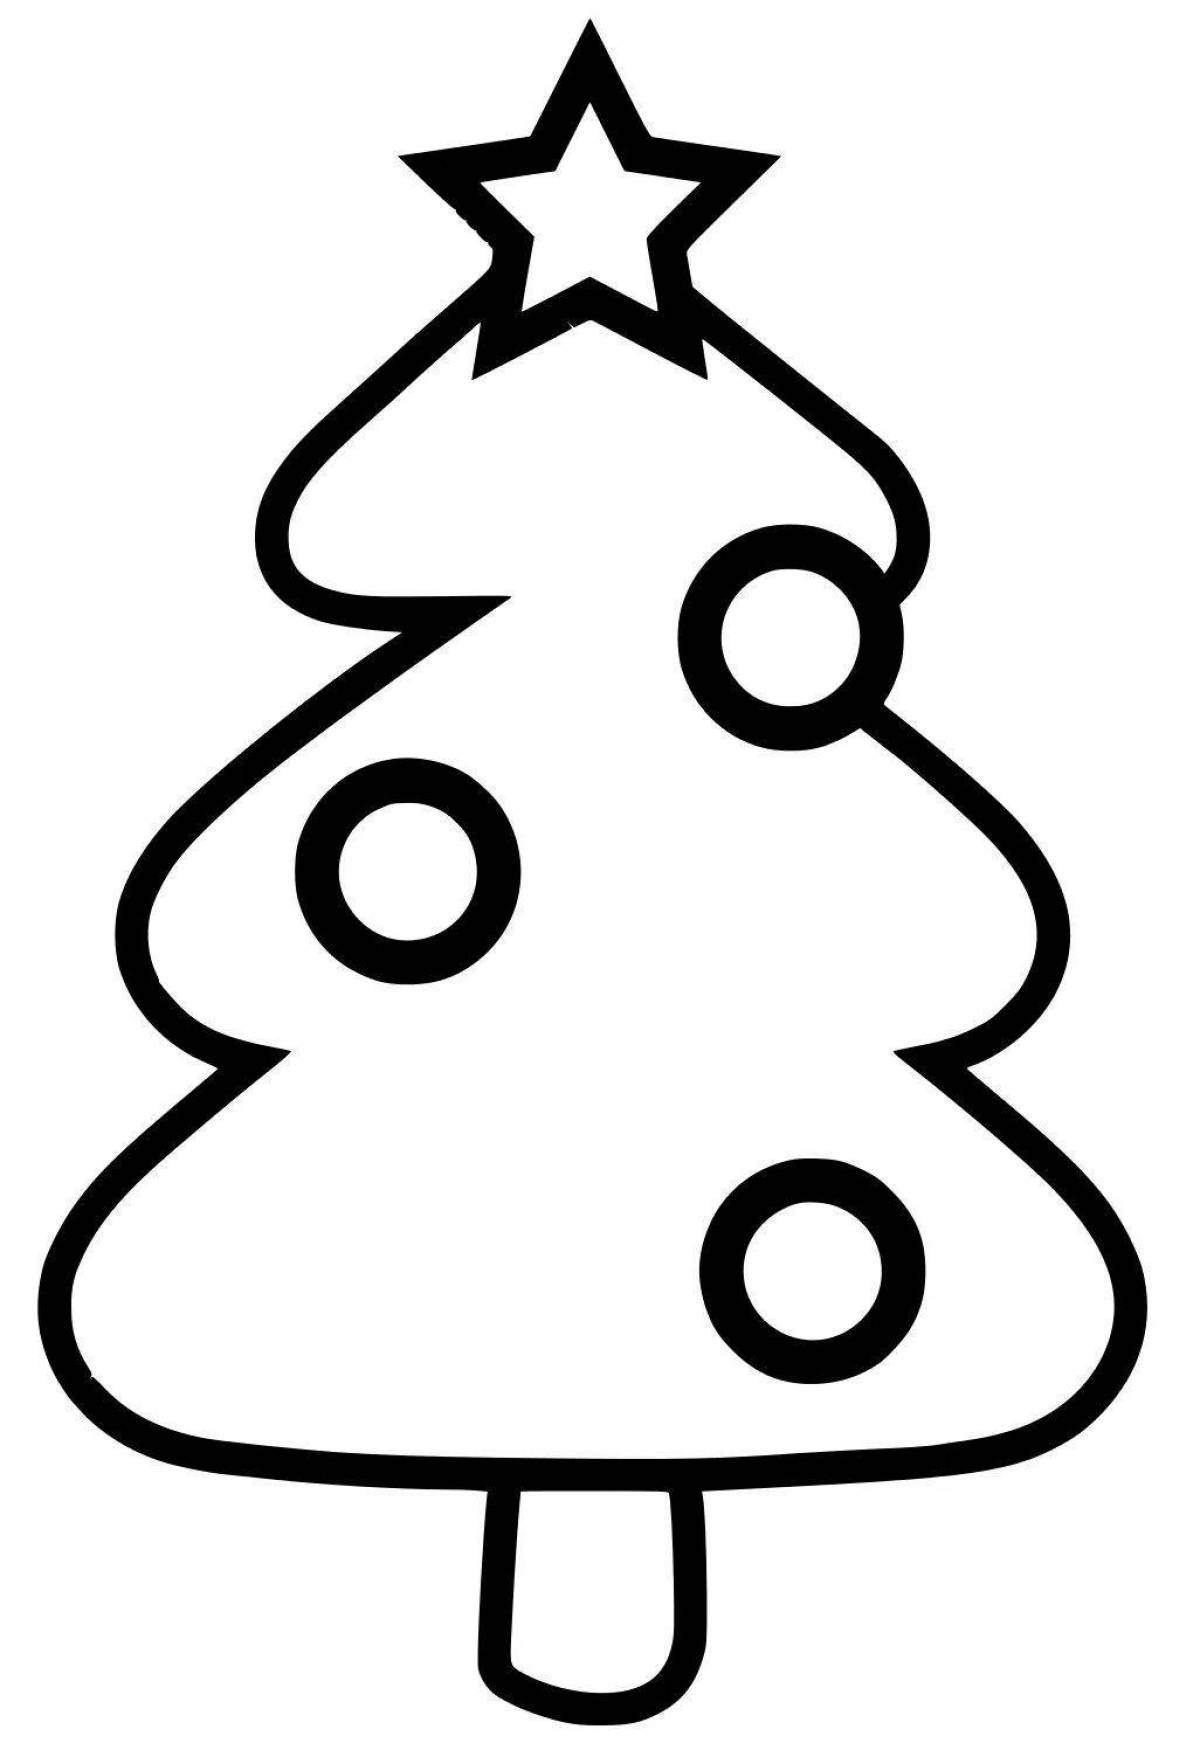 Shiny Christmas tree coloring book for kids